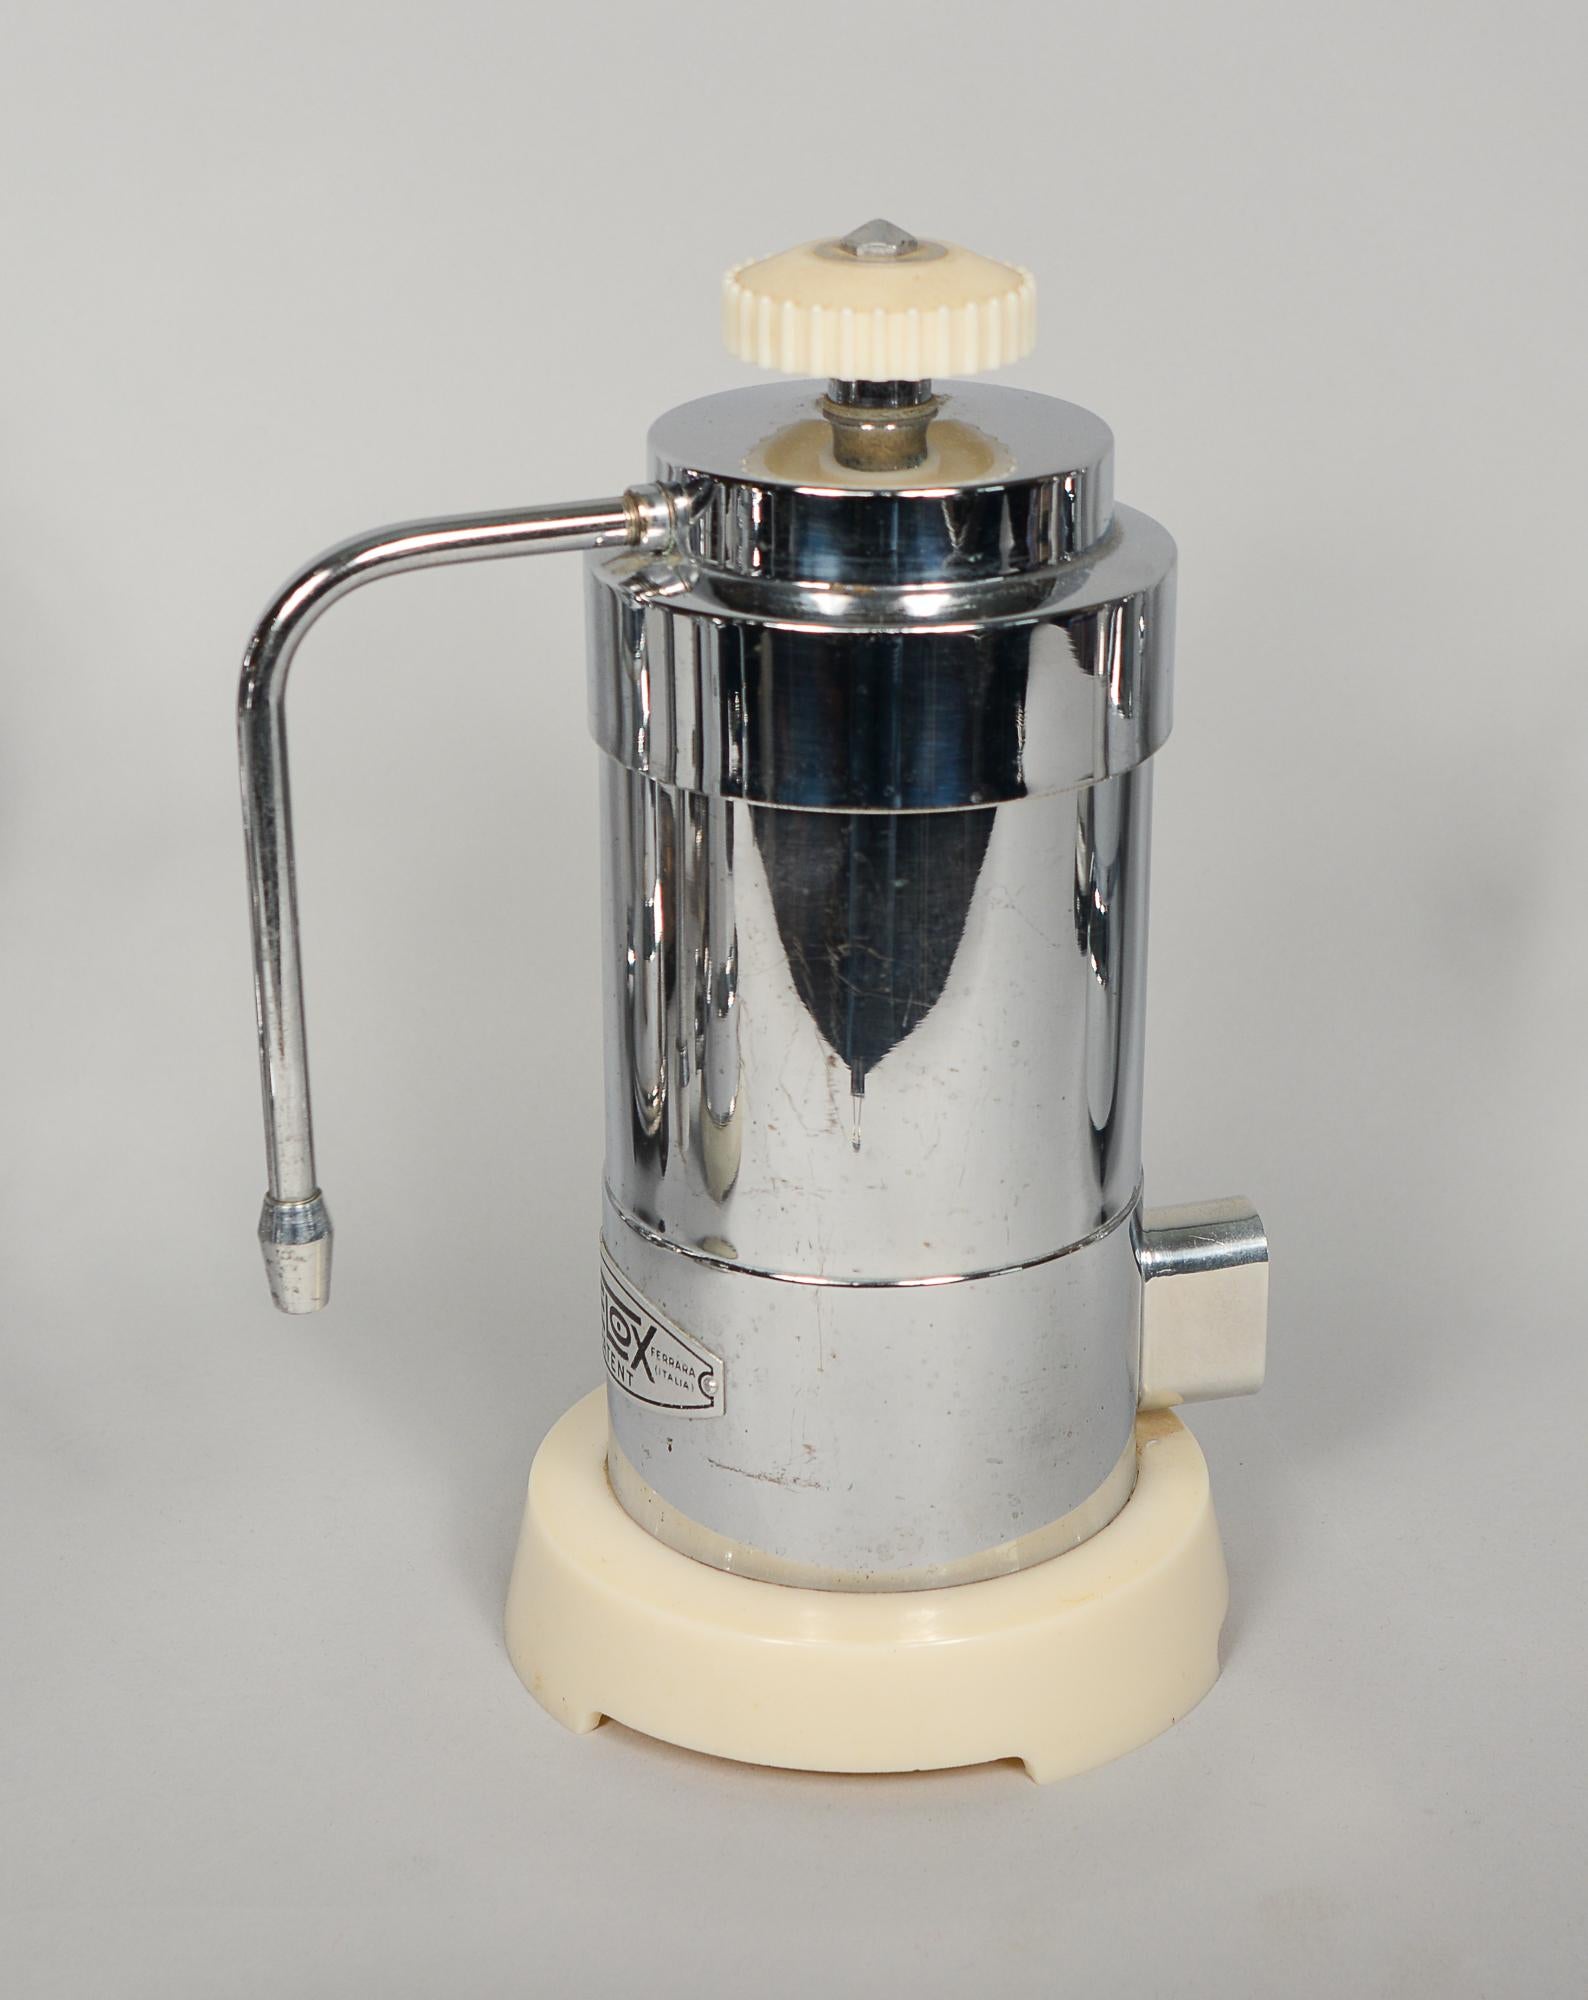 Collection of Vintage Espresso Makers in Chrome and Aluminum In Good Condition For Sale In San Mateo, CA